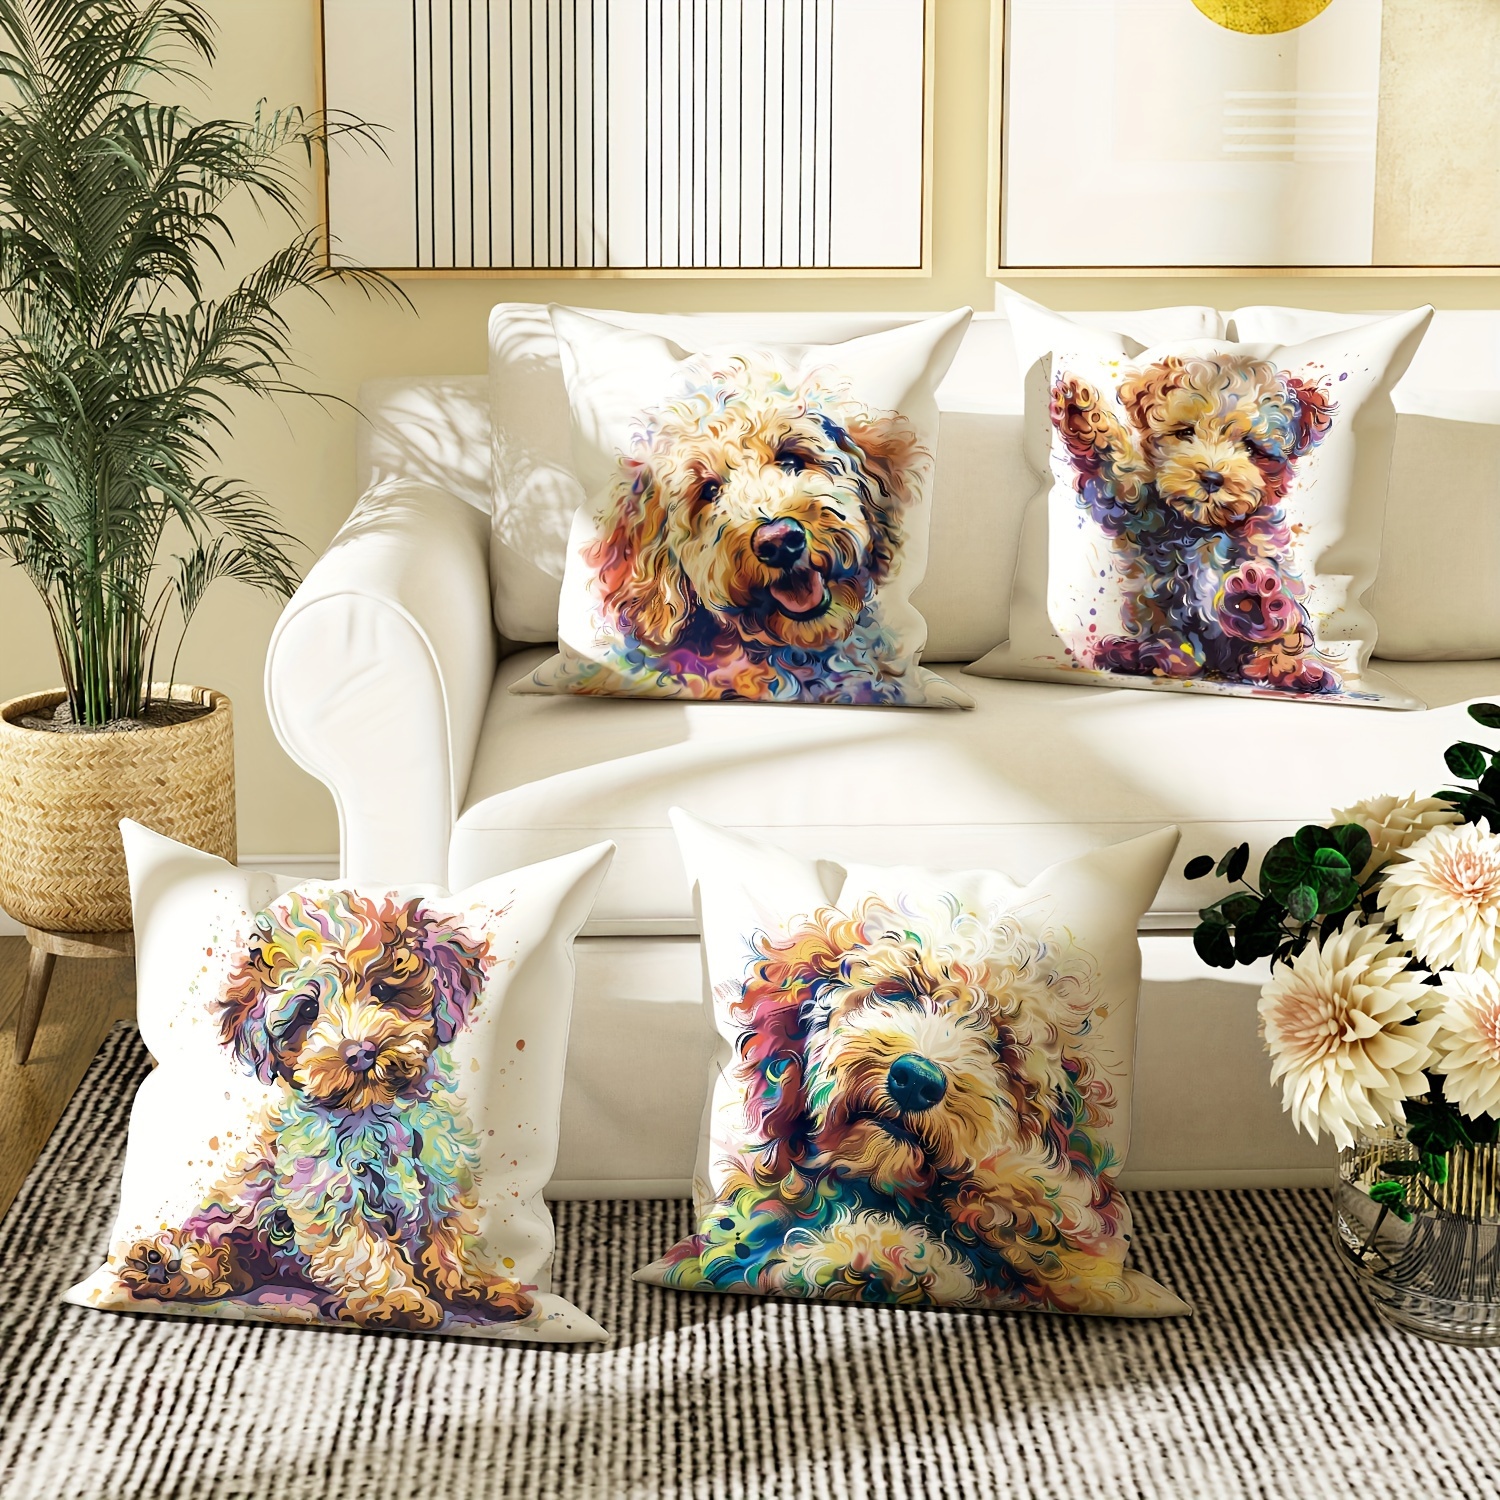 

Set Of 4 Contemporary Dog Print Throw Pillow Covers, 18x18 Inch, Machine Washable Polyester Cushion Cases With Zipper Closure For Sofa And Living Room Decoration - Pillow Inserts Not Included